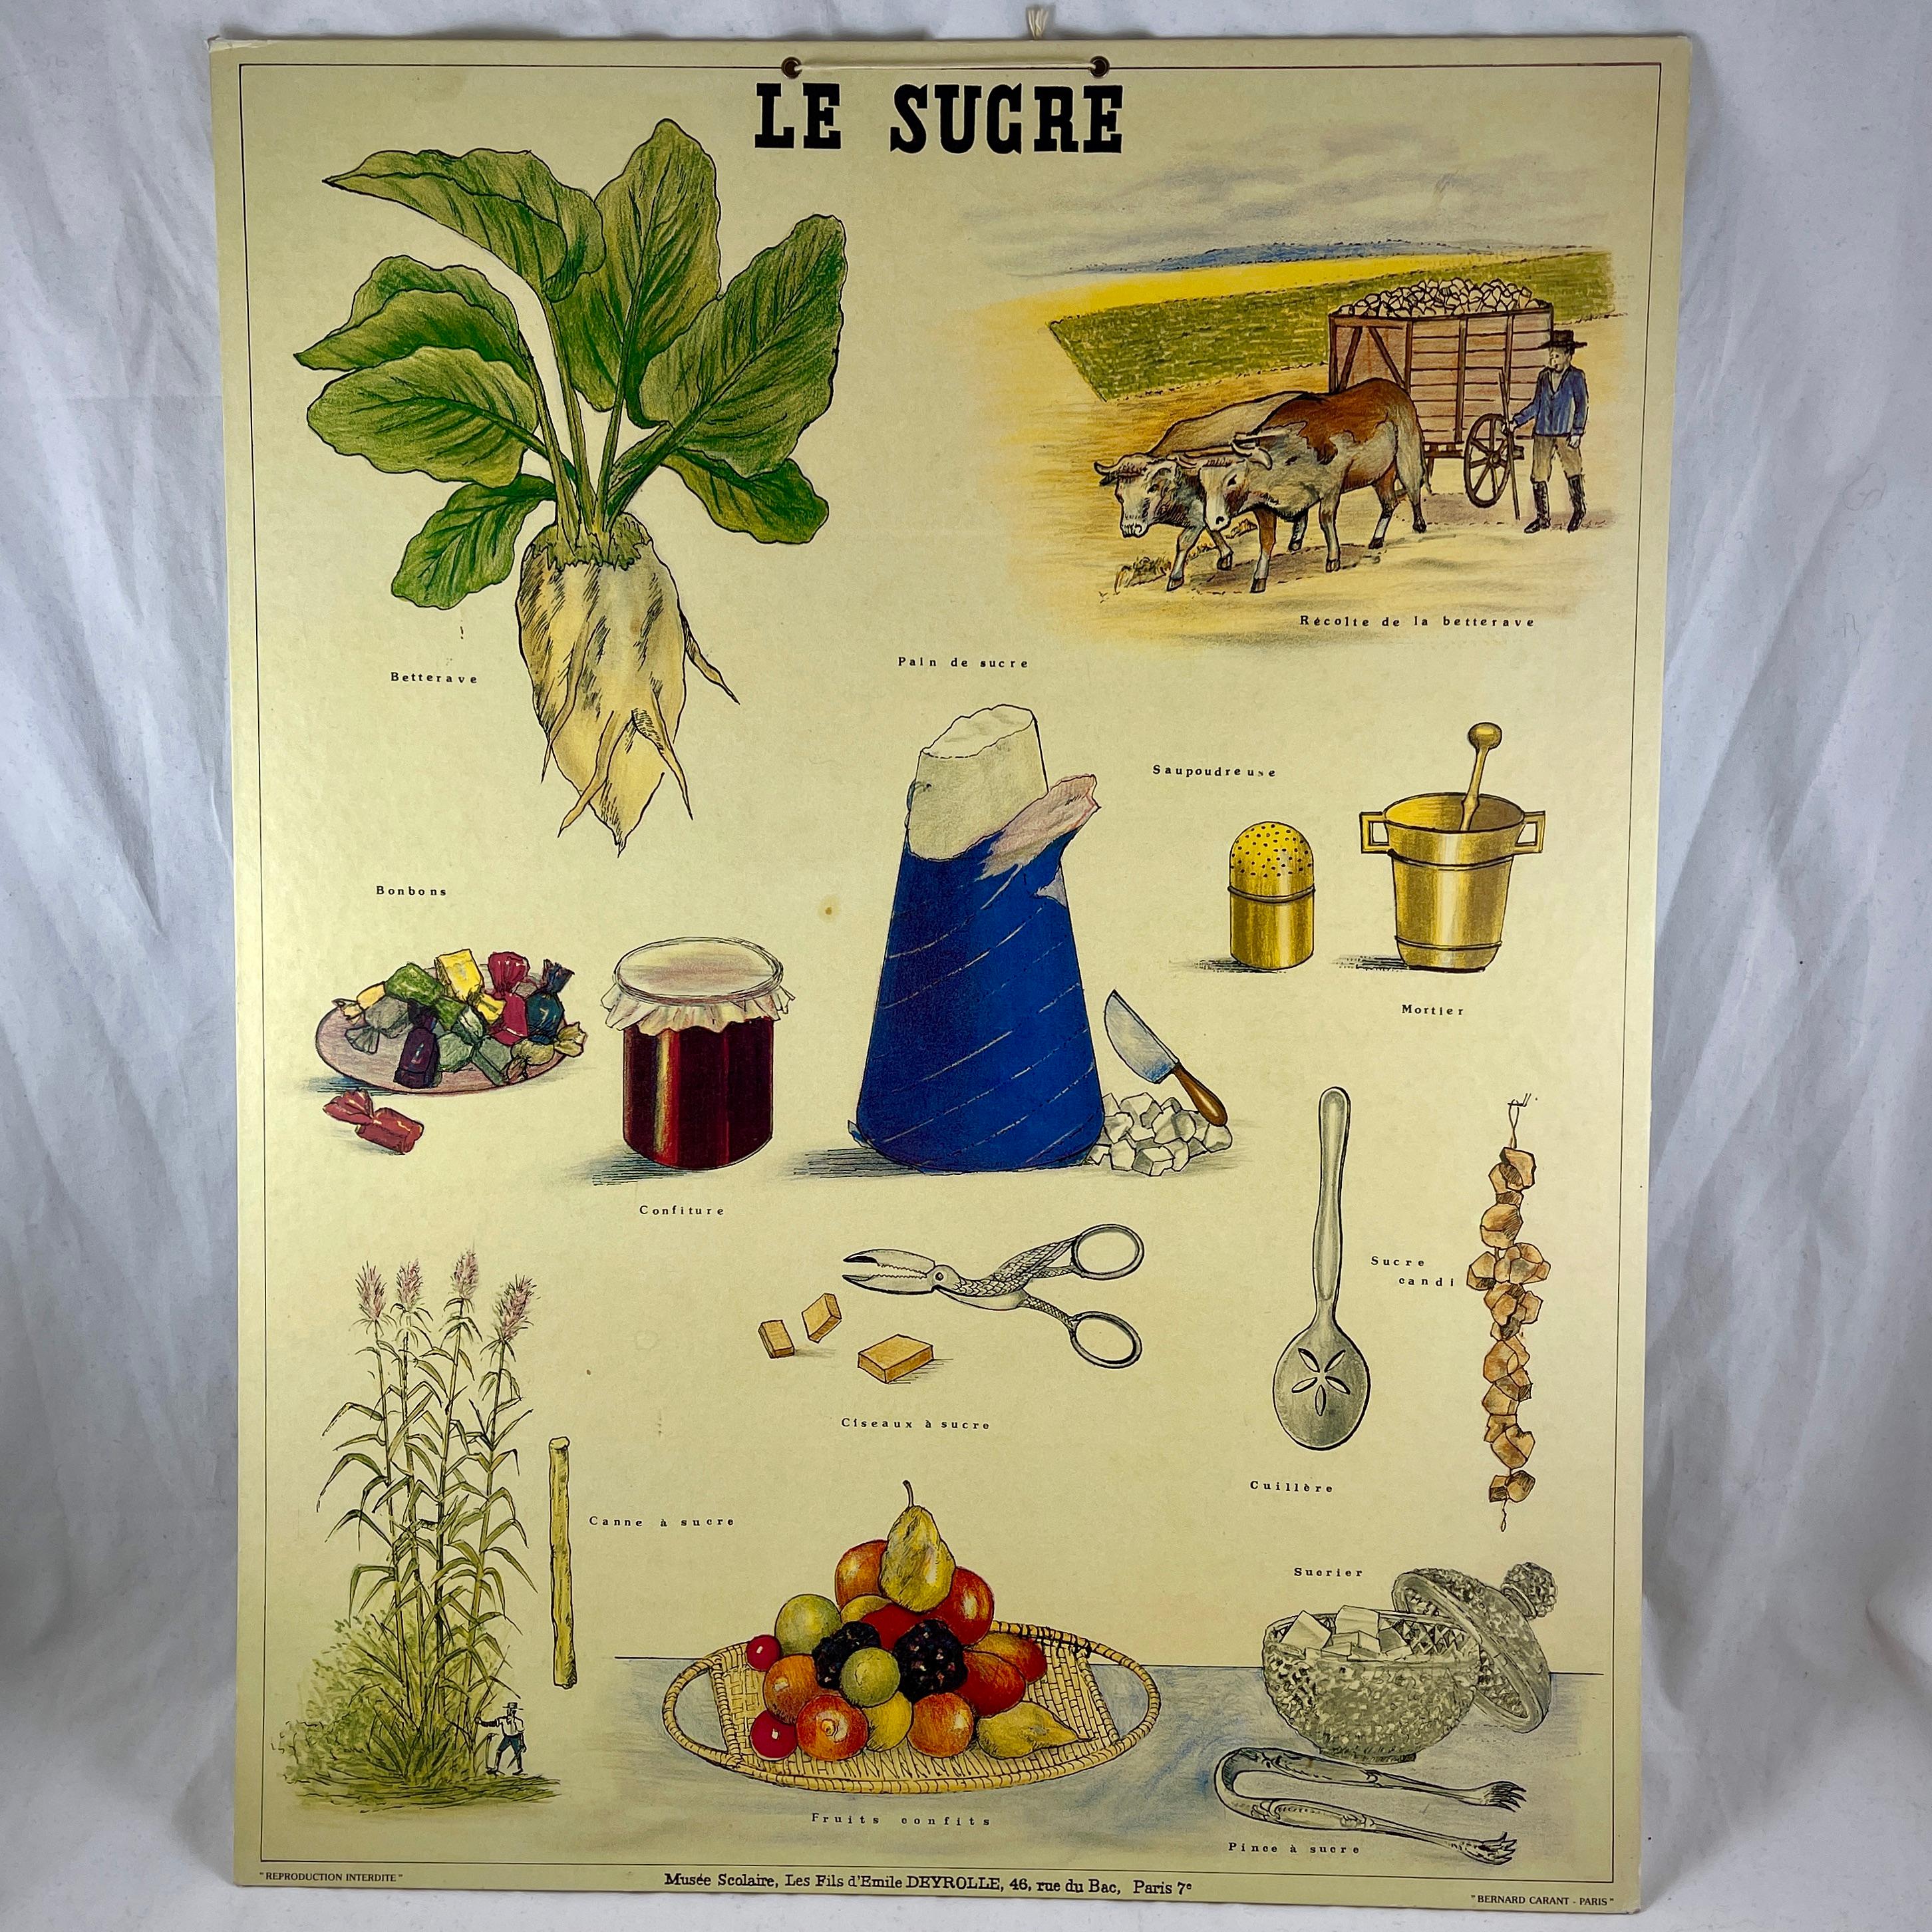 Le Sucre, a mounted, offset printed lithograph illustrated by the French naturalist, Émile Deyrolle – printed for the classroom by Bernard Carant, Paris, France, circa 1930s-1940s.

This is a high quality, original Carant printing, not a